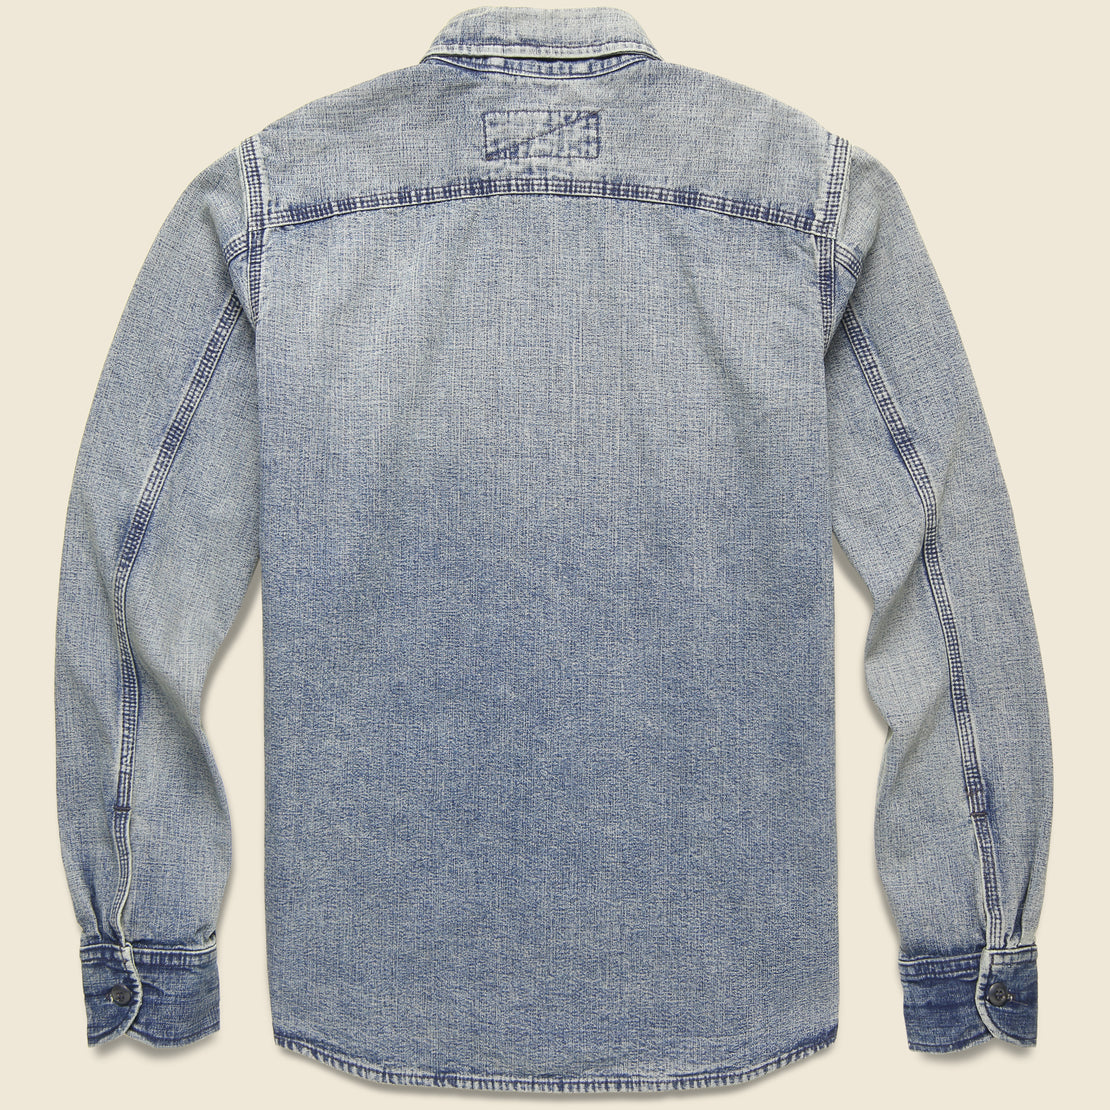 Washed Out ISC Work Shirt - Indigo - Rogue Territory - STAG Provisions - Tops - L/S Woven - Overshirt